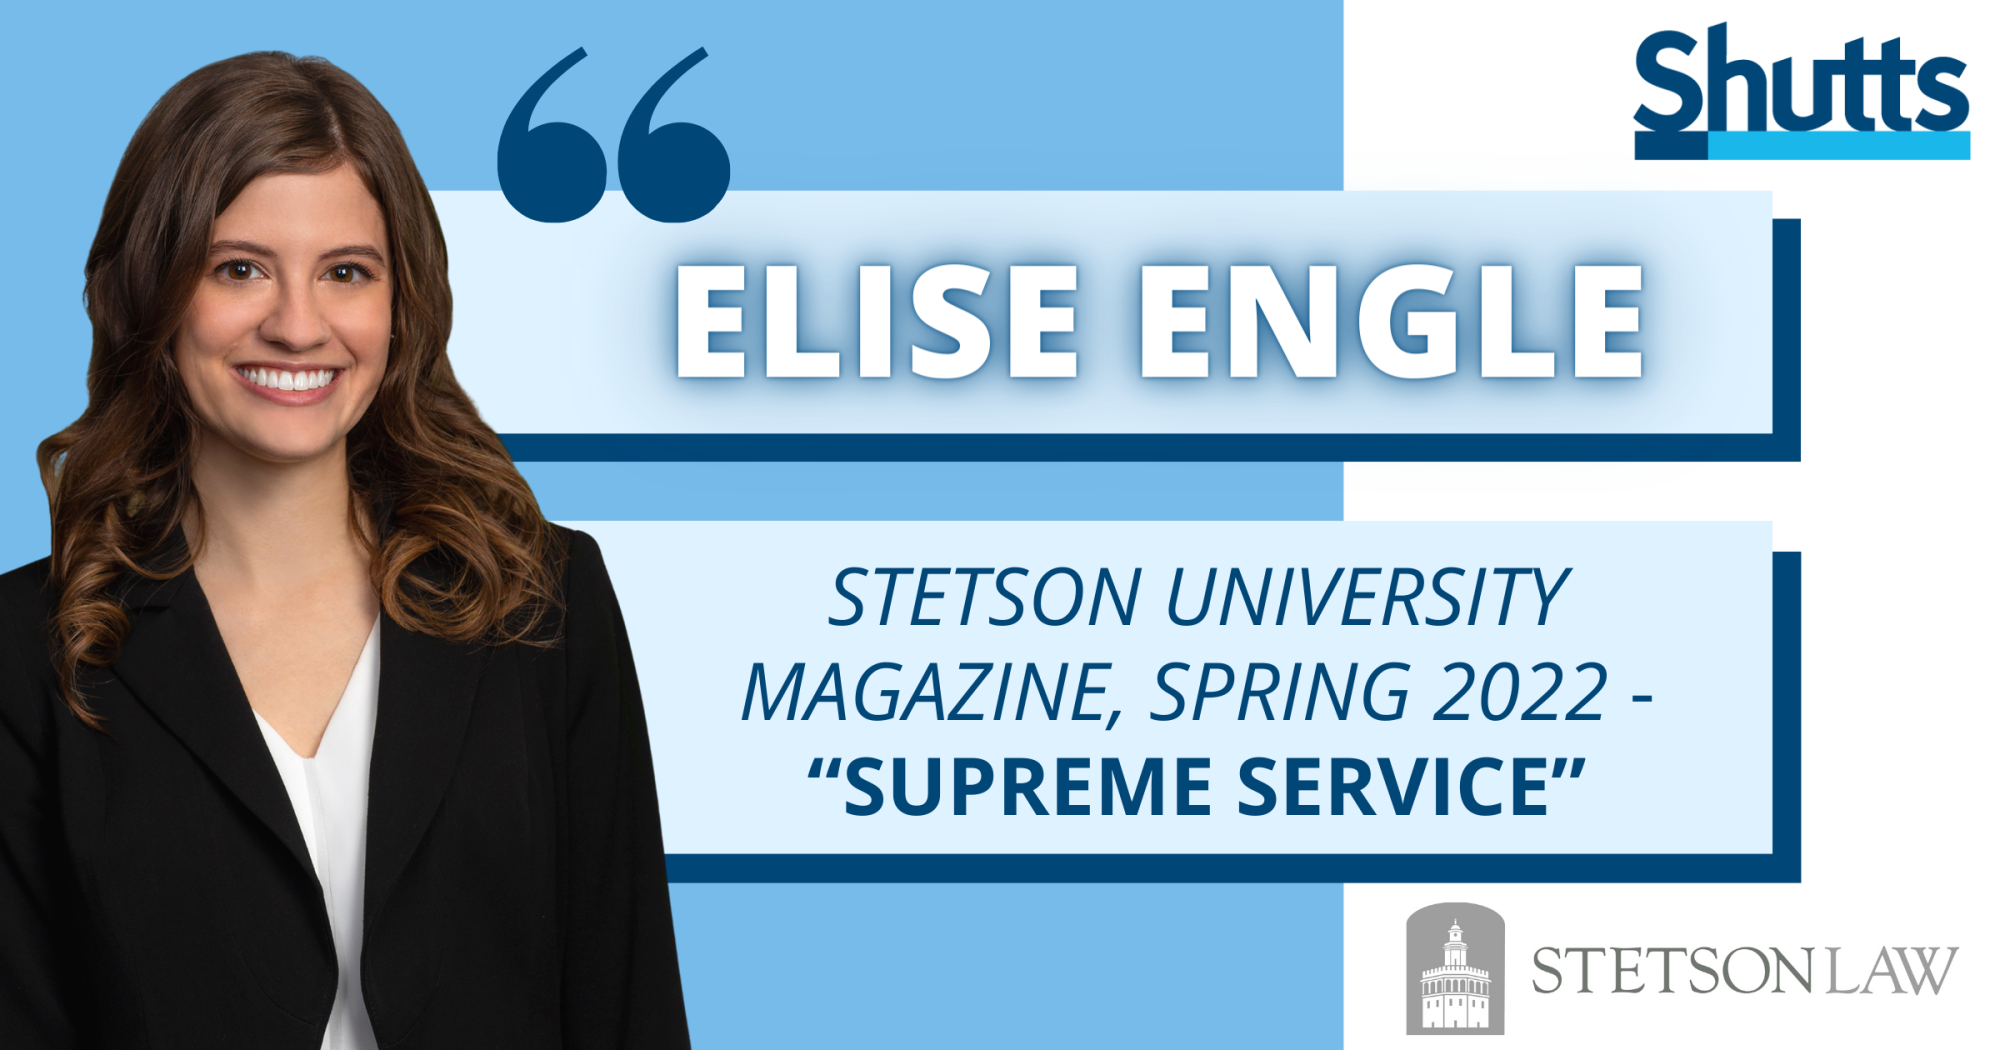 Elise Engle Quoted in Stetson University Magazine Article, “Supreme Service”